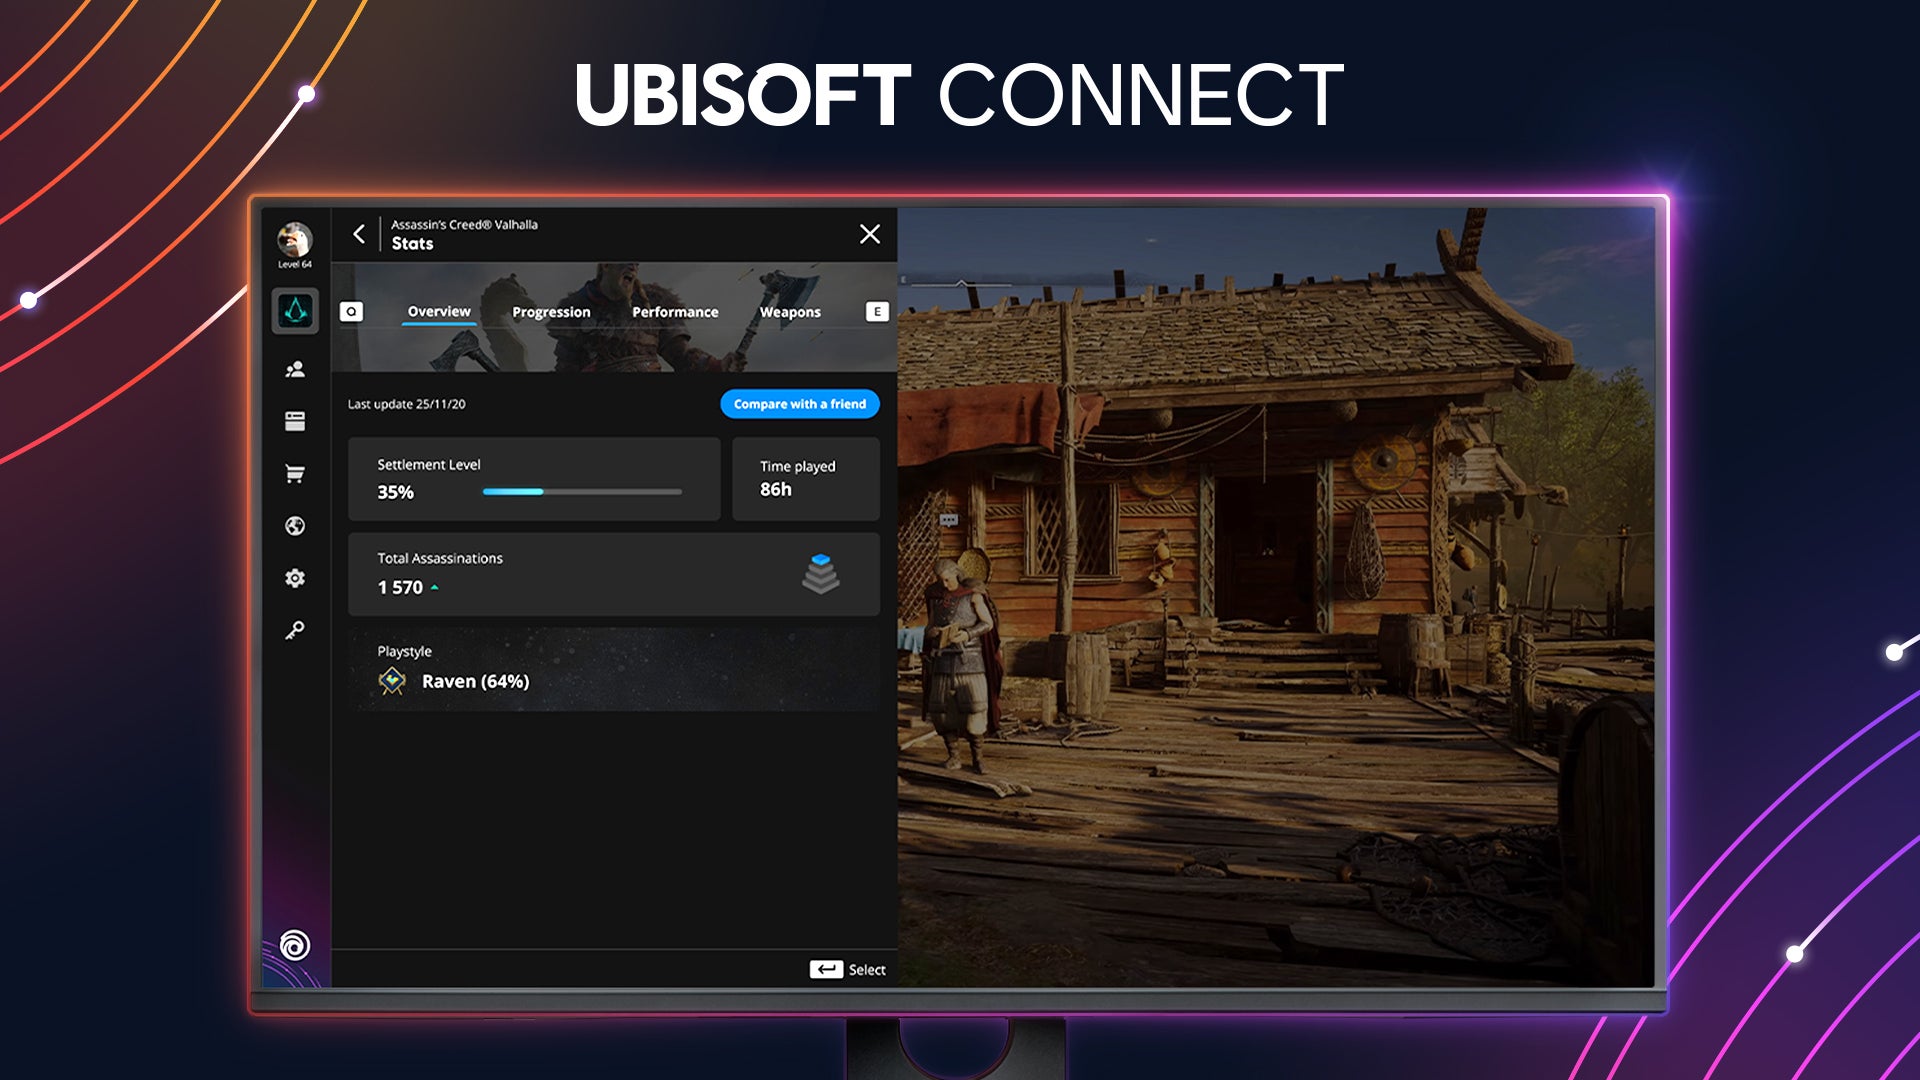 Interface Ubisoft Connect.